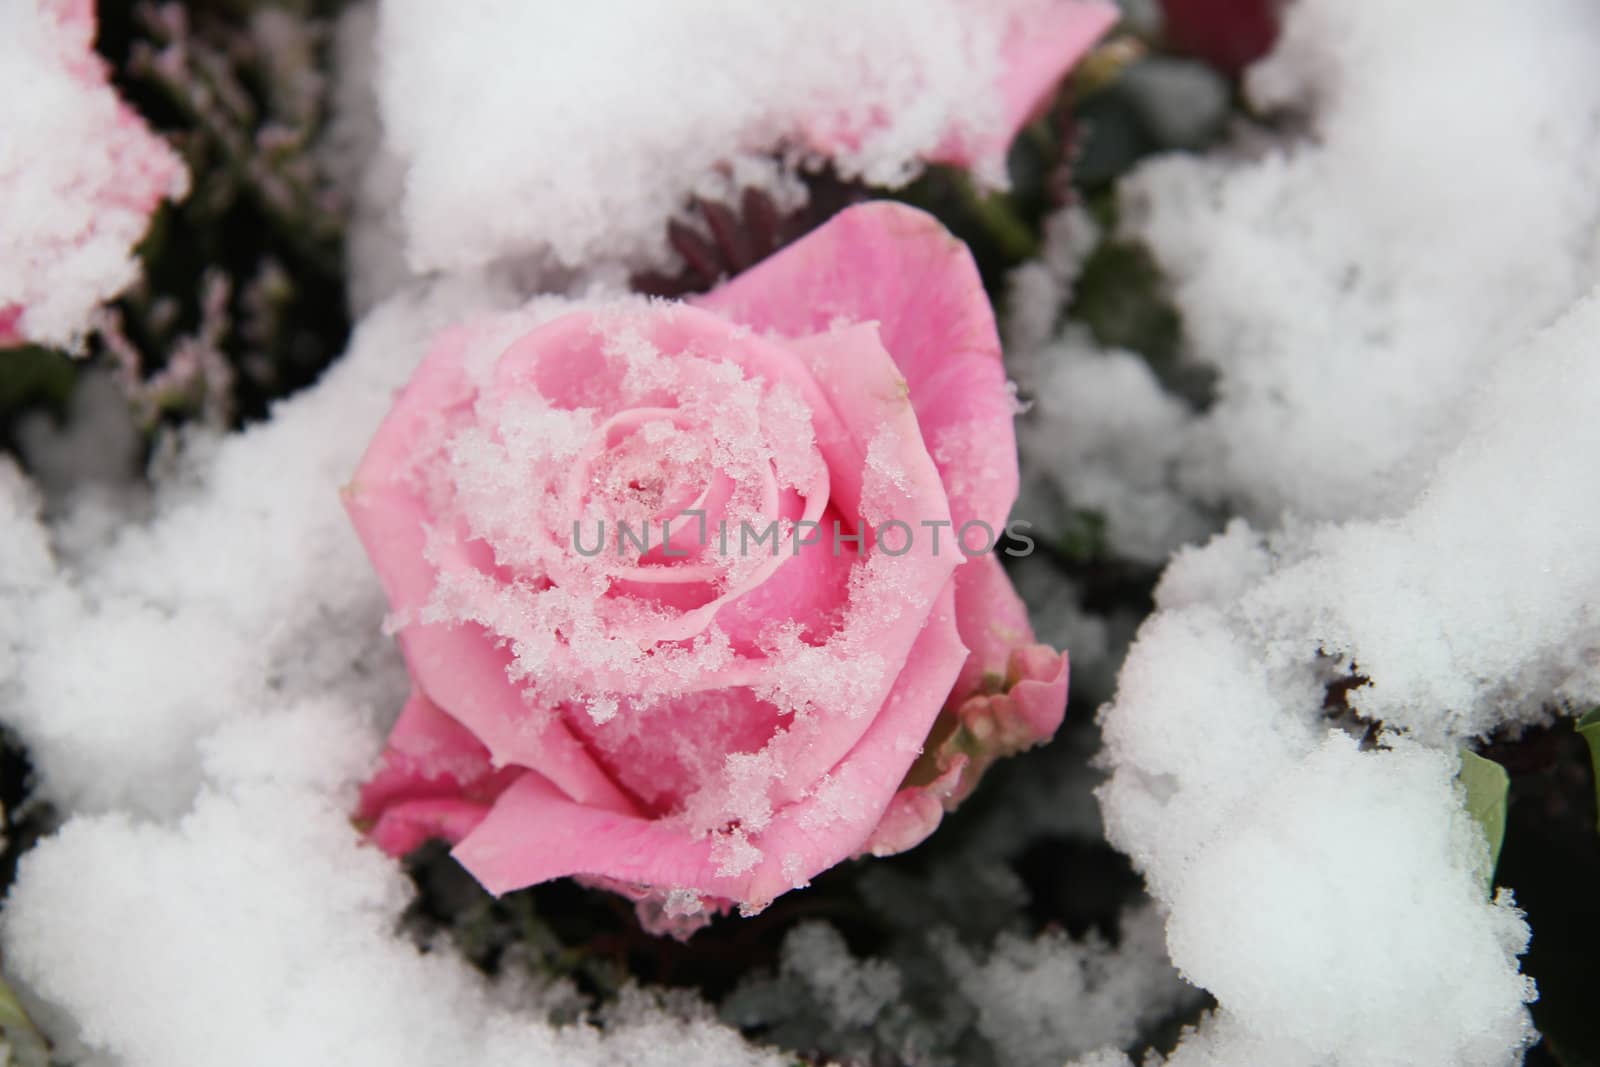 Big pink rose, covered with fresh snowflakes